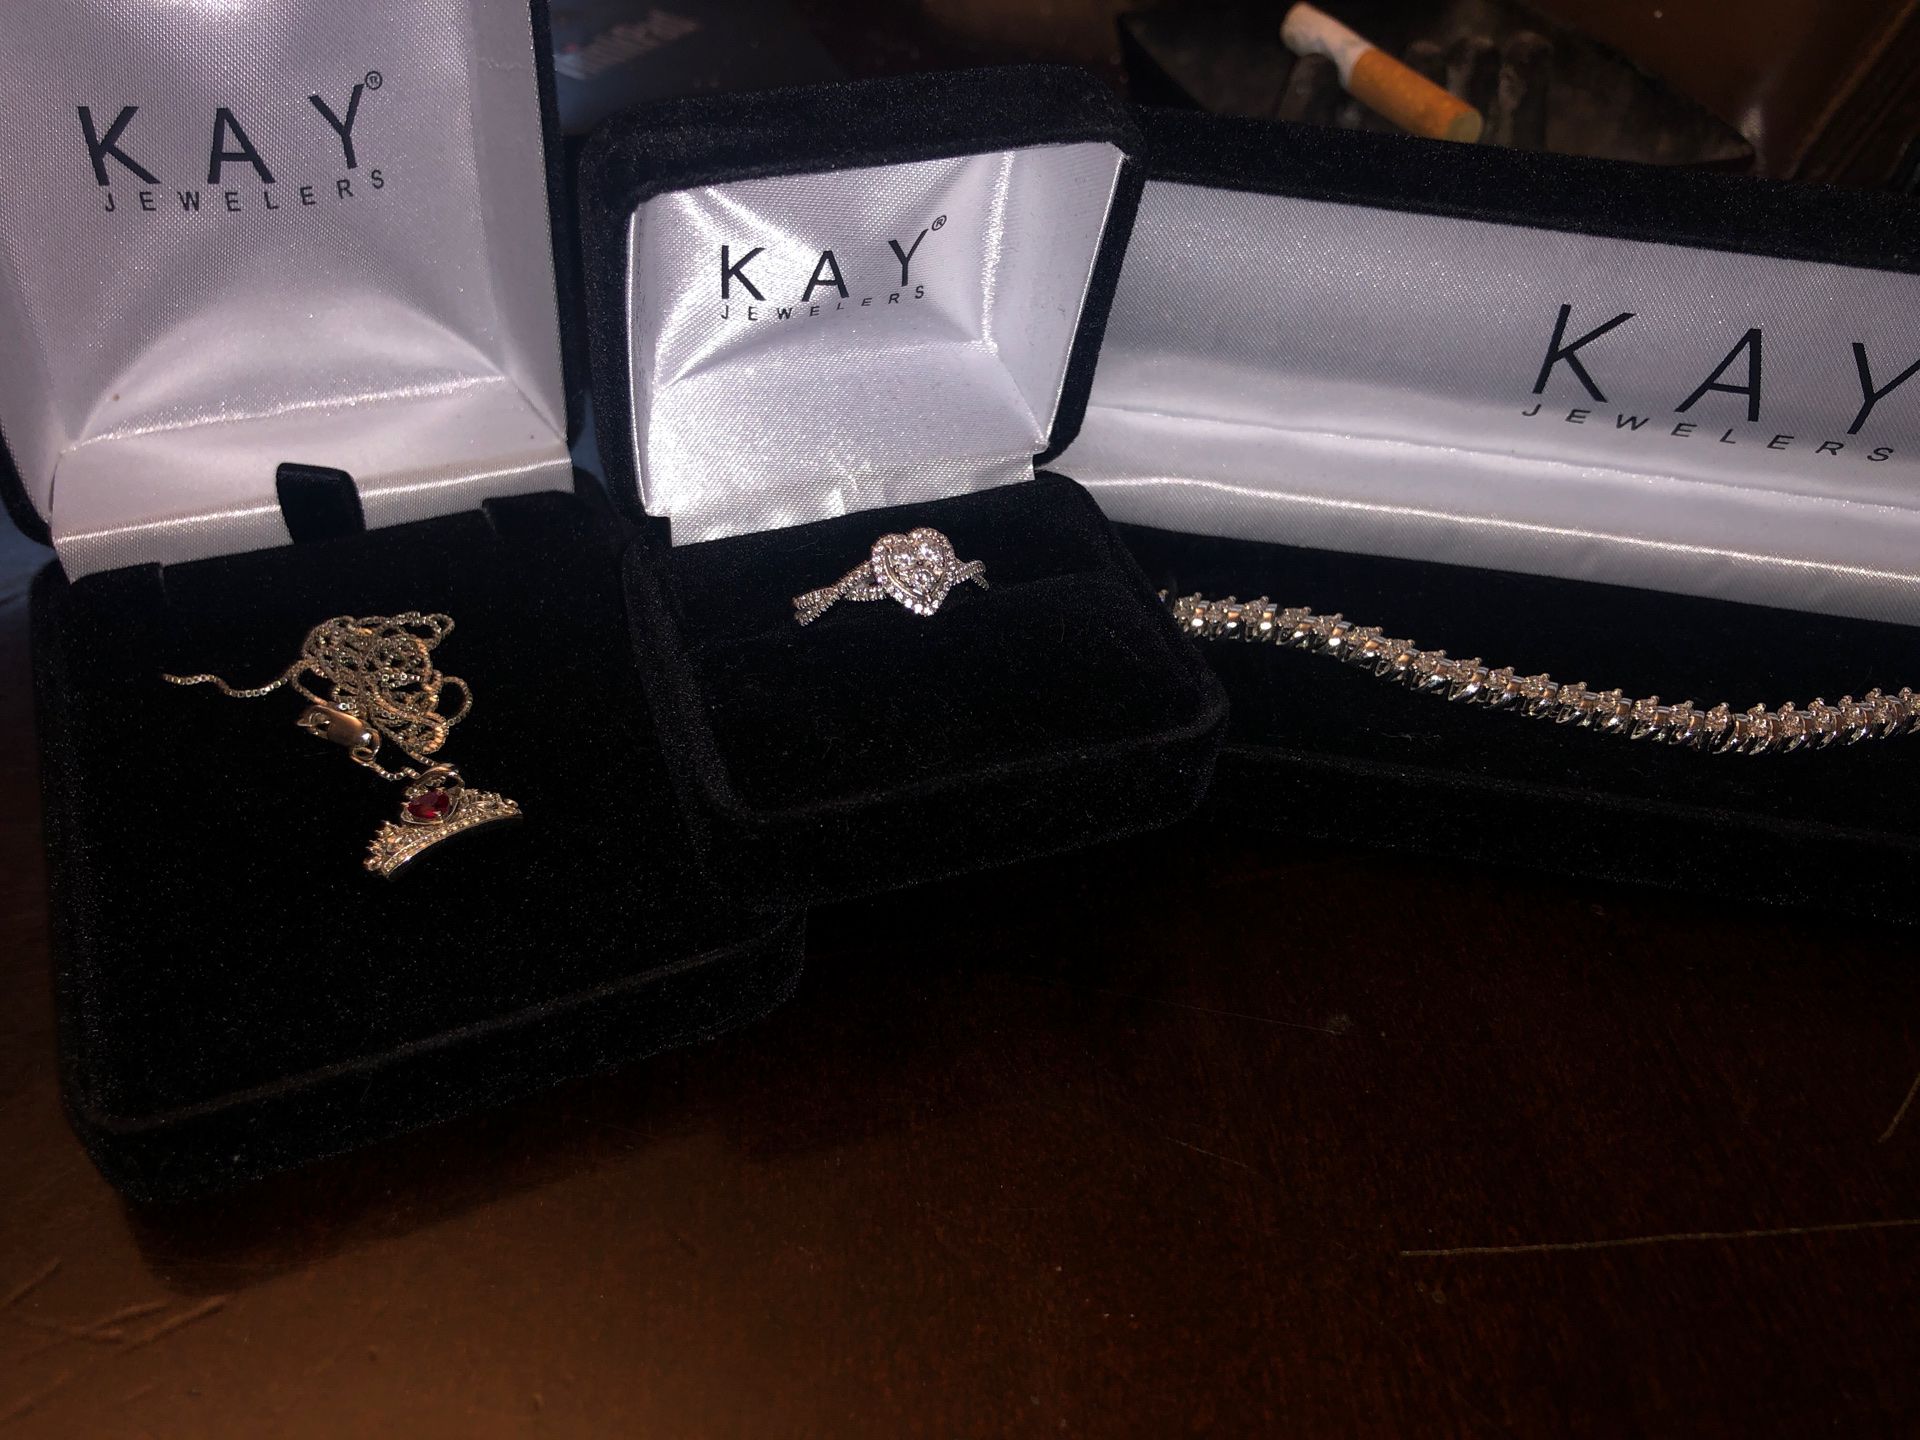 Kay jewelers ring, bracelet and necklace